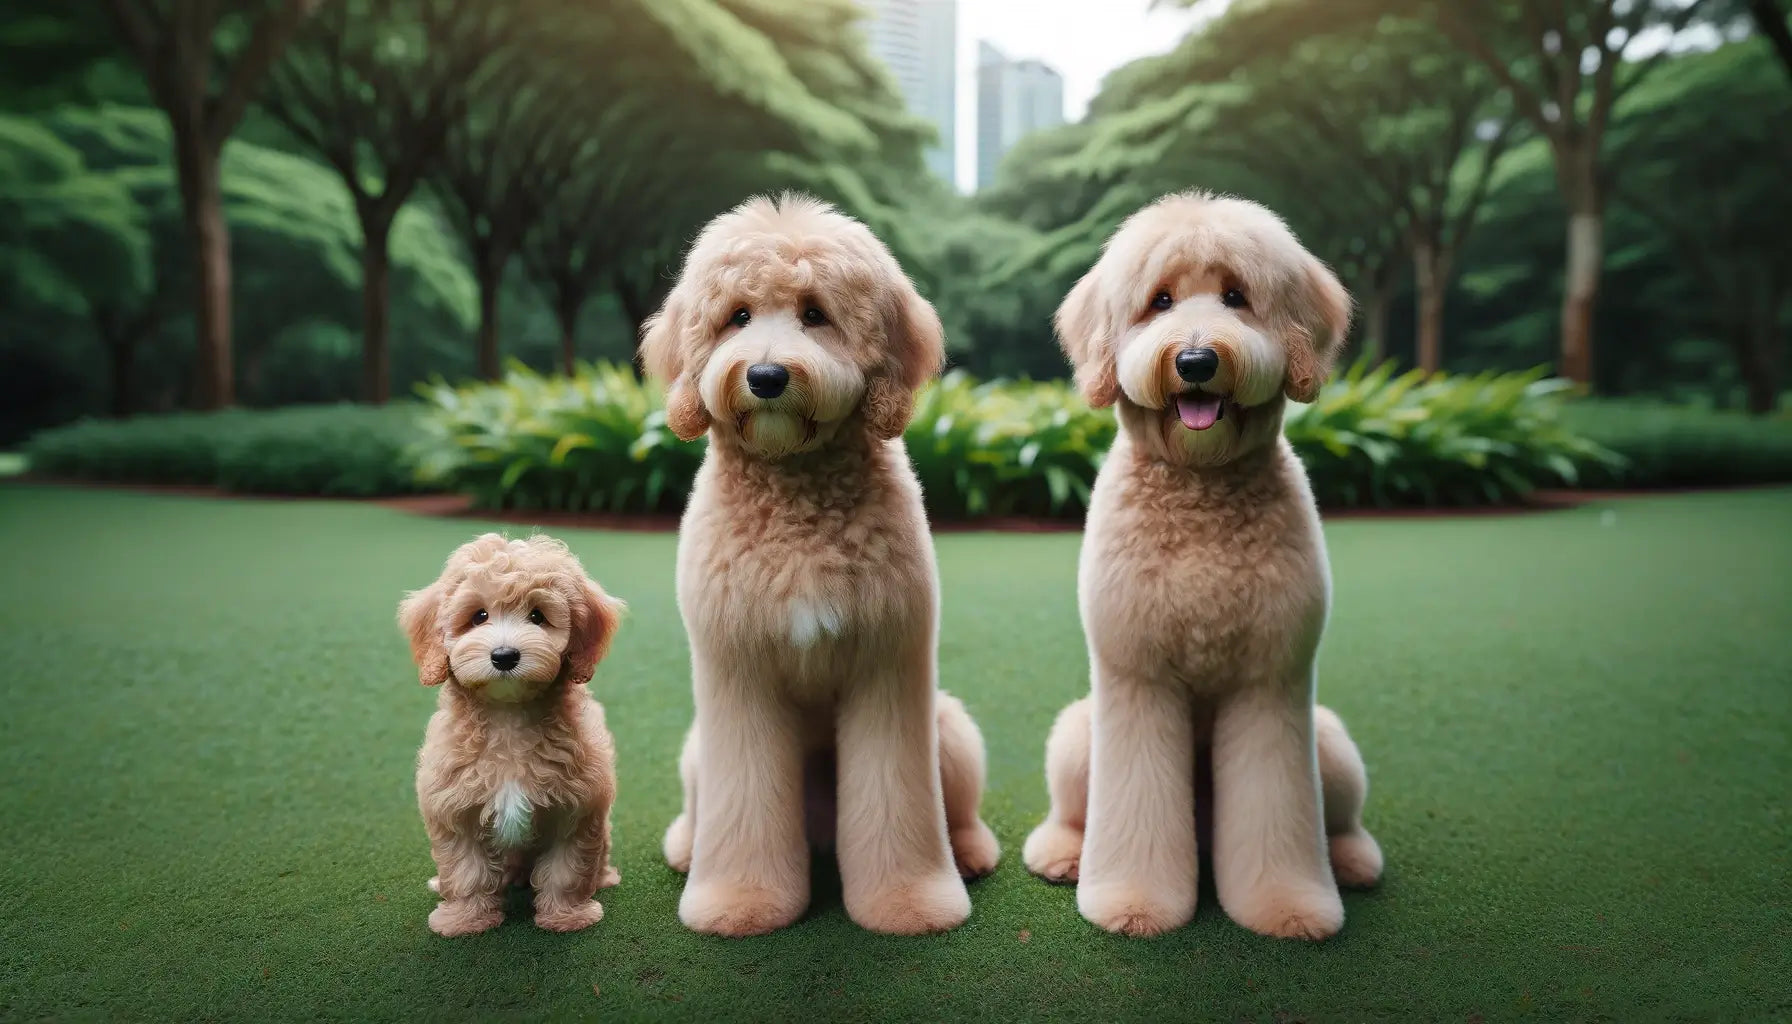 Teacup Goldendoodle male and female in a park, highlighting their diminutive size.